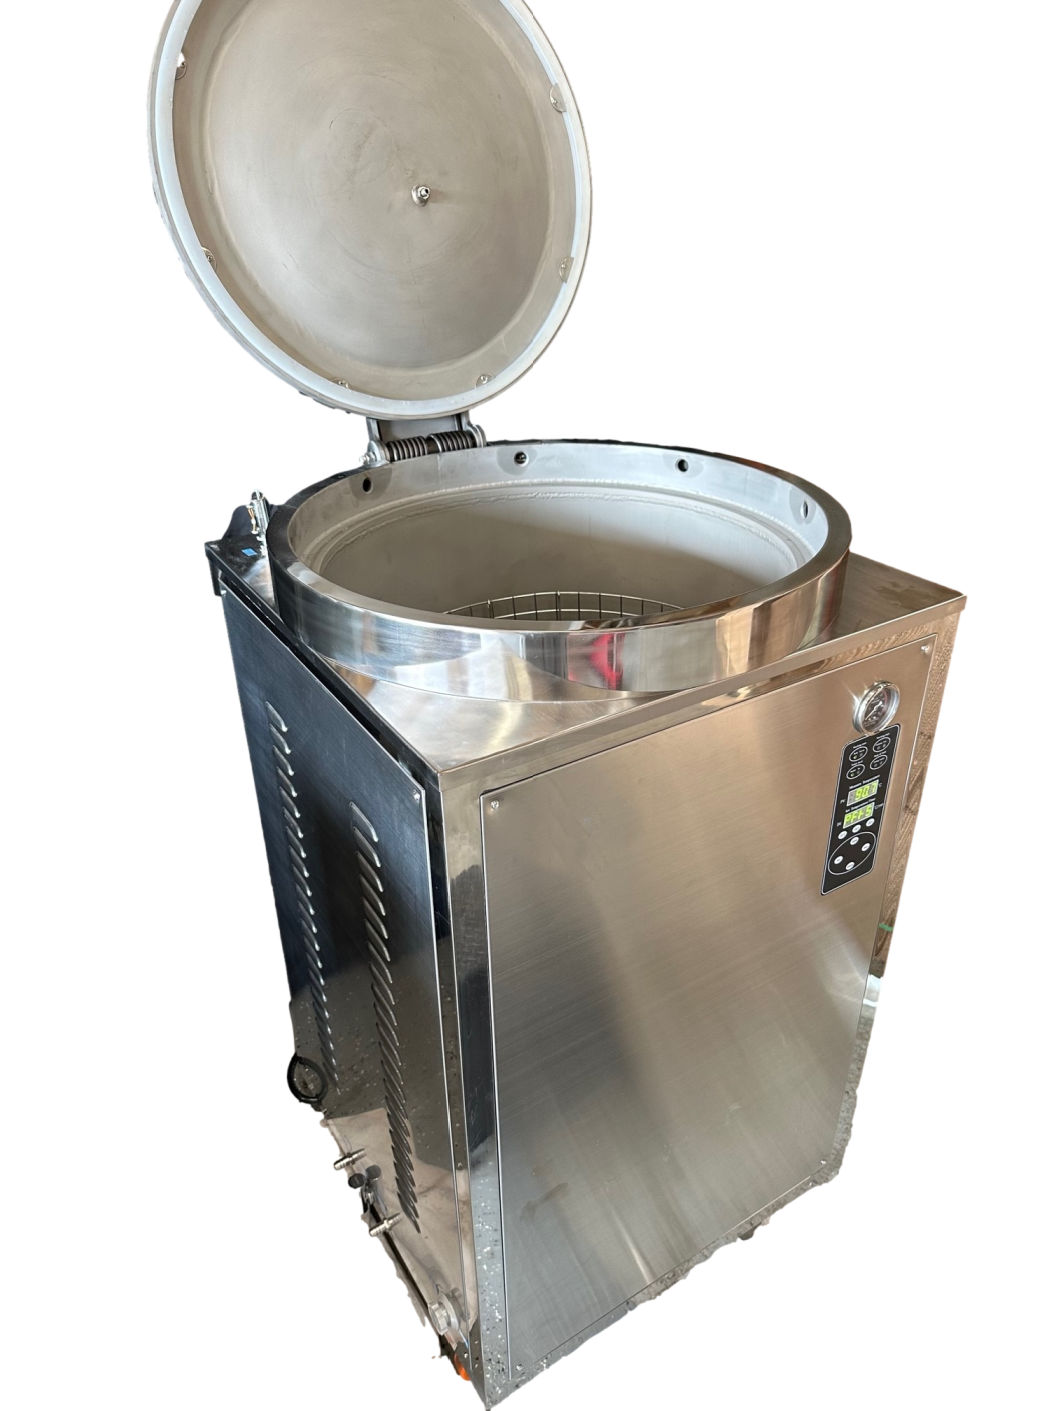 https://www.midwestgrowkits.com/resize/Shared/Images/Product/200L-Commercial-Pressure-Sterilizer-Digital-Electric-Mushroom-Autoclave/Side_200L_web.jpg?bw=600&w=600